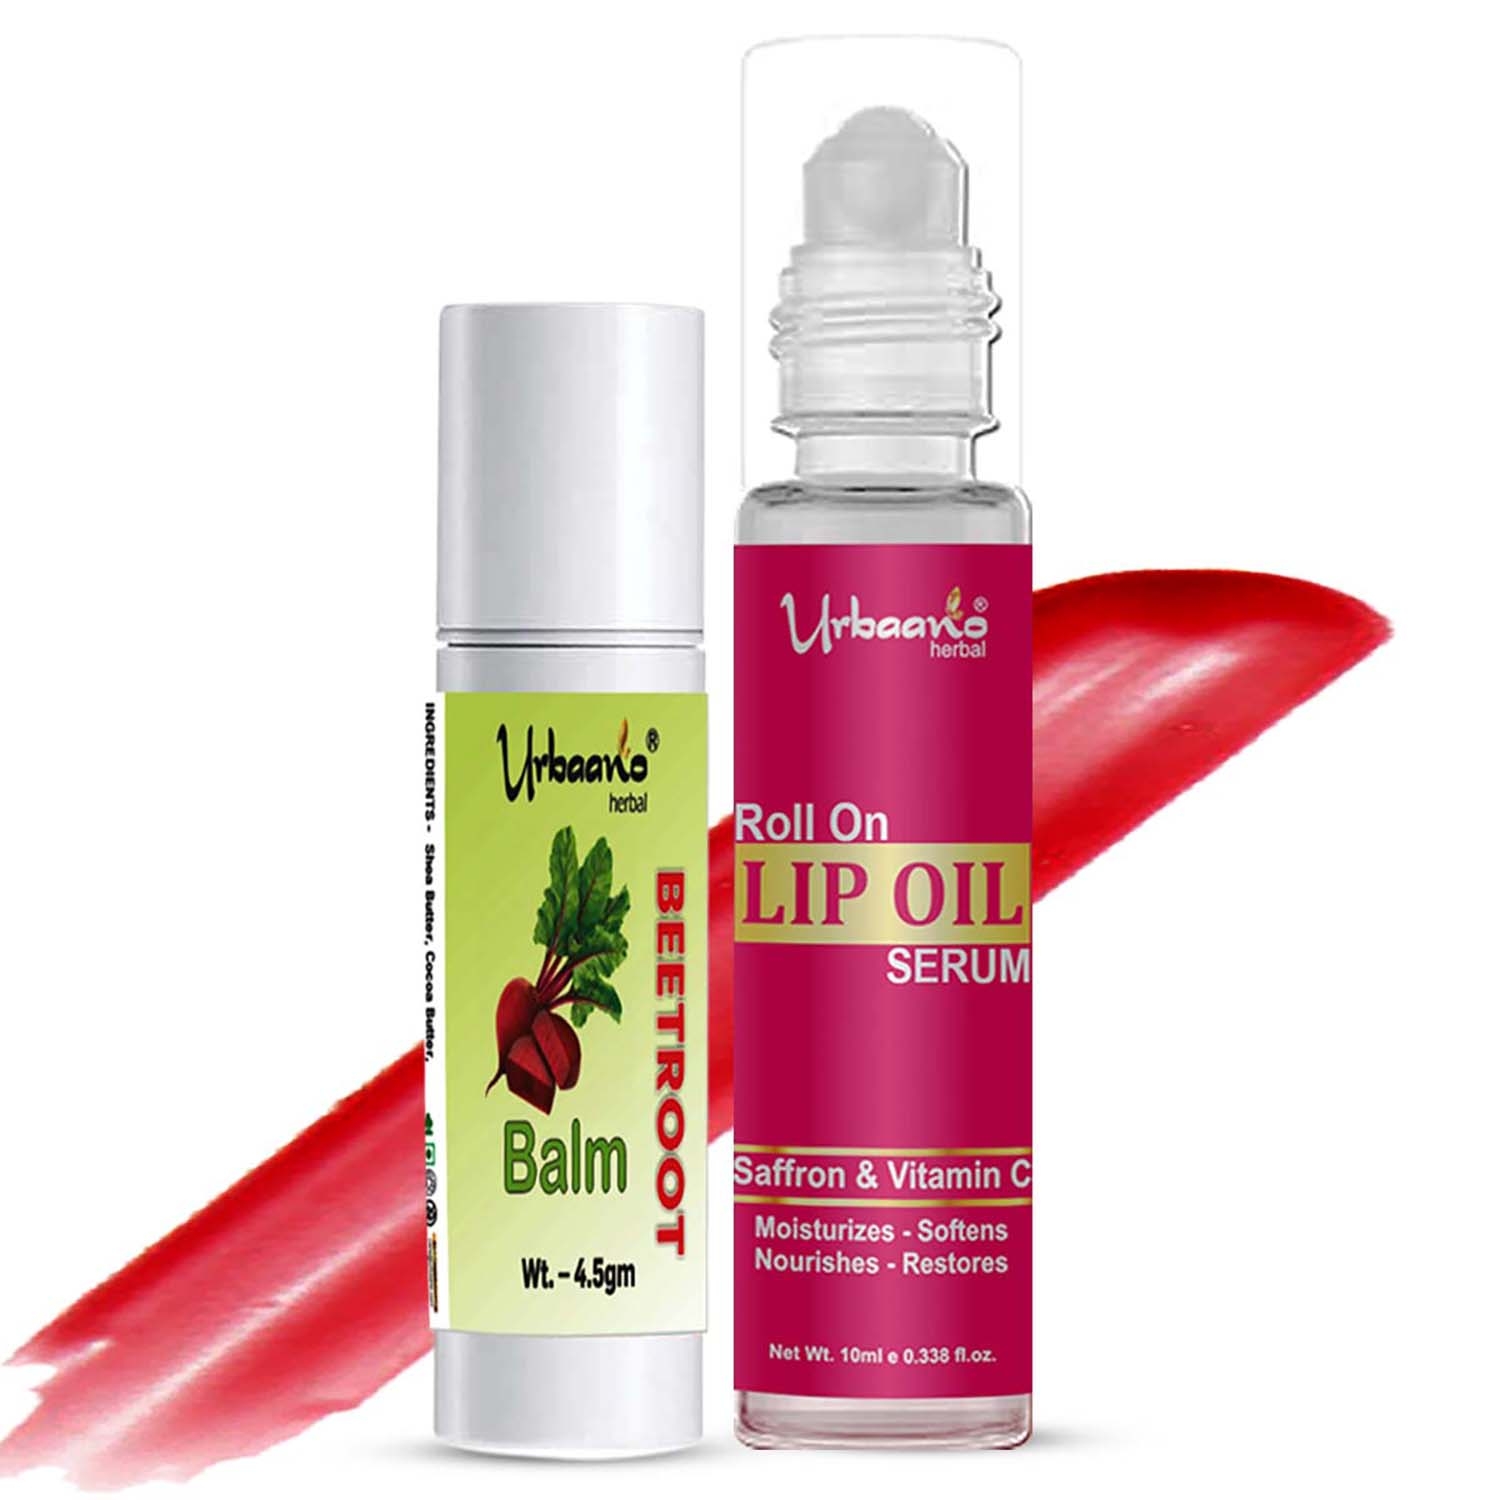 Urbaano Herbal Beetroot Lip Balm Tint  Natural Lip Oil, Serum Combo 100%  Natural, ECOCERT Squalane infused with Natural SPF, Ultra Moisturization  for Women  Teens 4.5gm +10ml